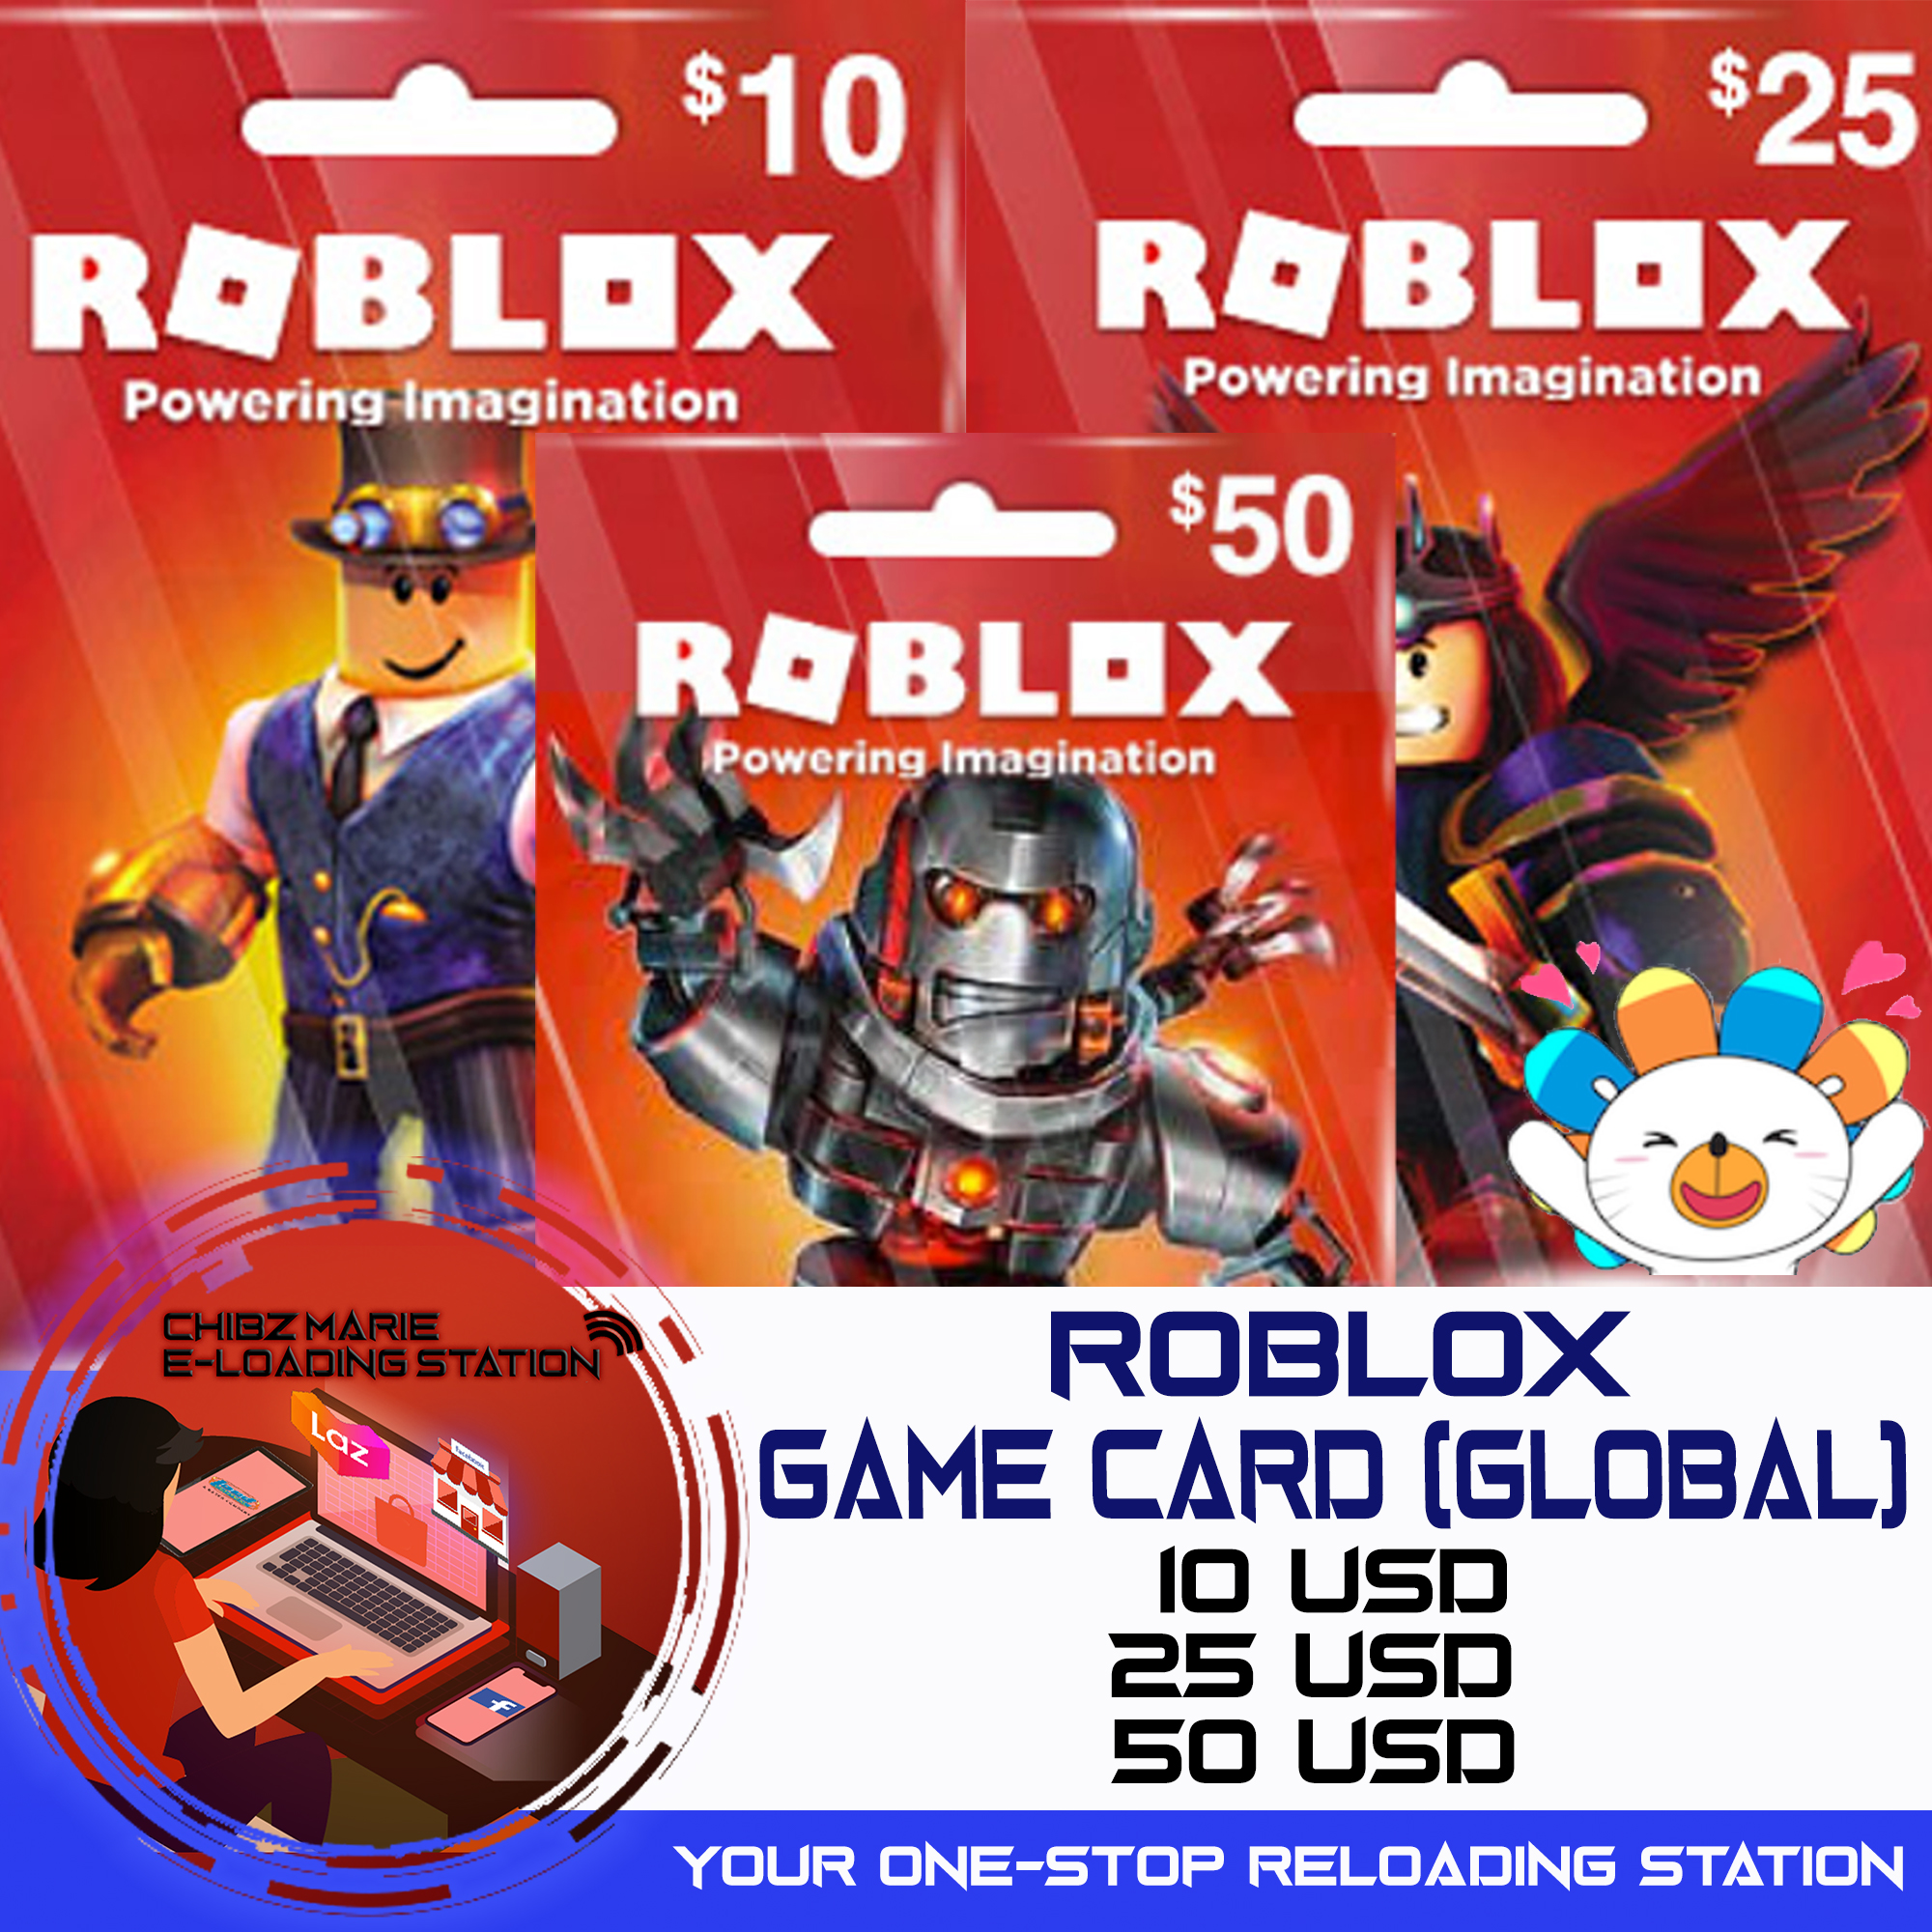 Robux Roblox Gift Card Game Card Global Us 10 25 50 Chibzmarie Lazada Ph - 50 robux gift card